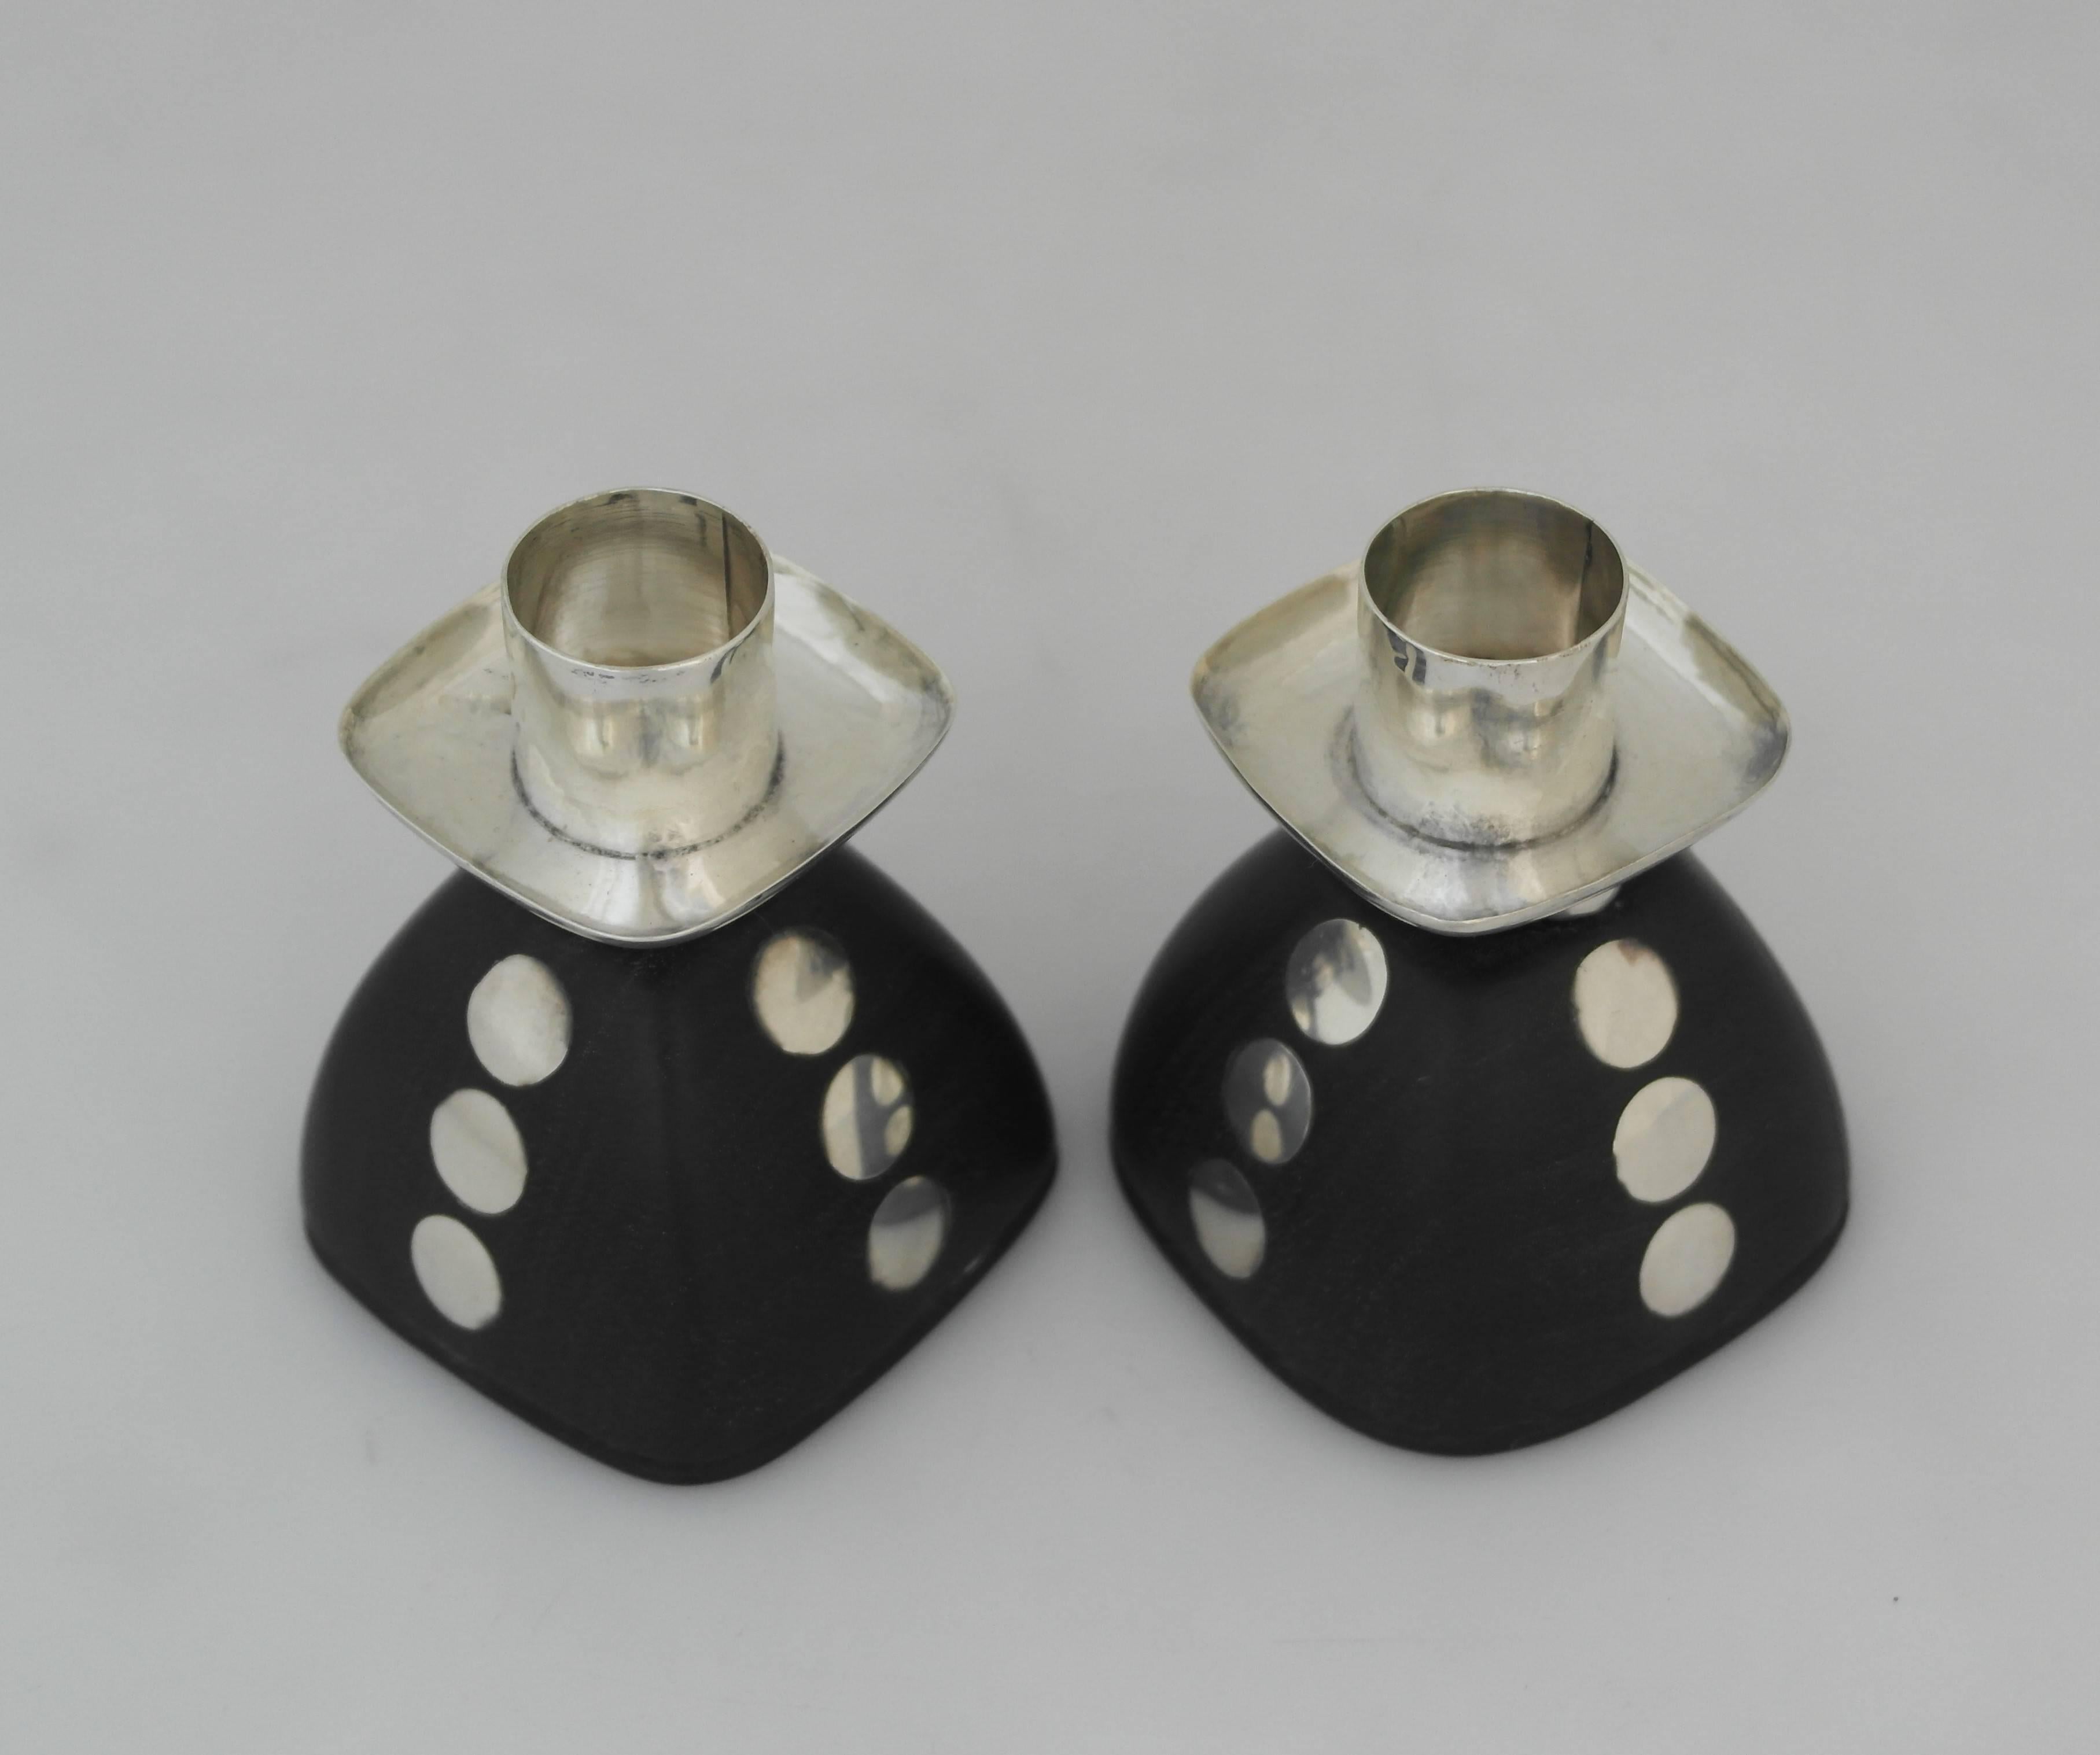 Being offered are a pair of sterling silver candlesticks by William Spratling of Taxco, Mexico. Bell shaped pair carved out of rosewood with applied silver discs; silver bobeches resting on ball motifs. Dimensions: 3 1/2 inches height x 2 3/4 inches